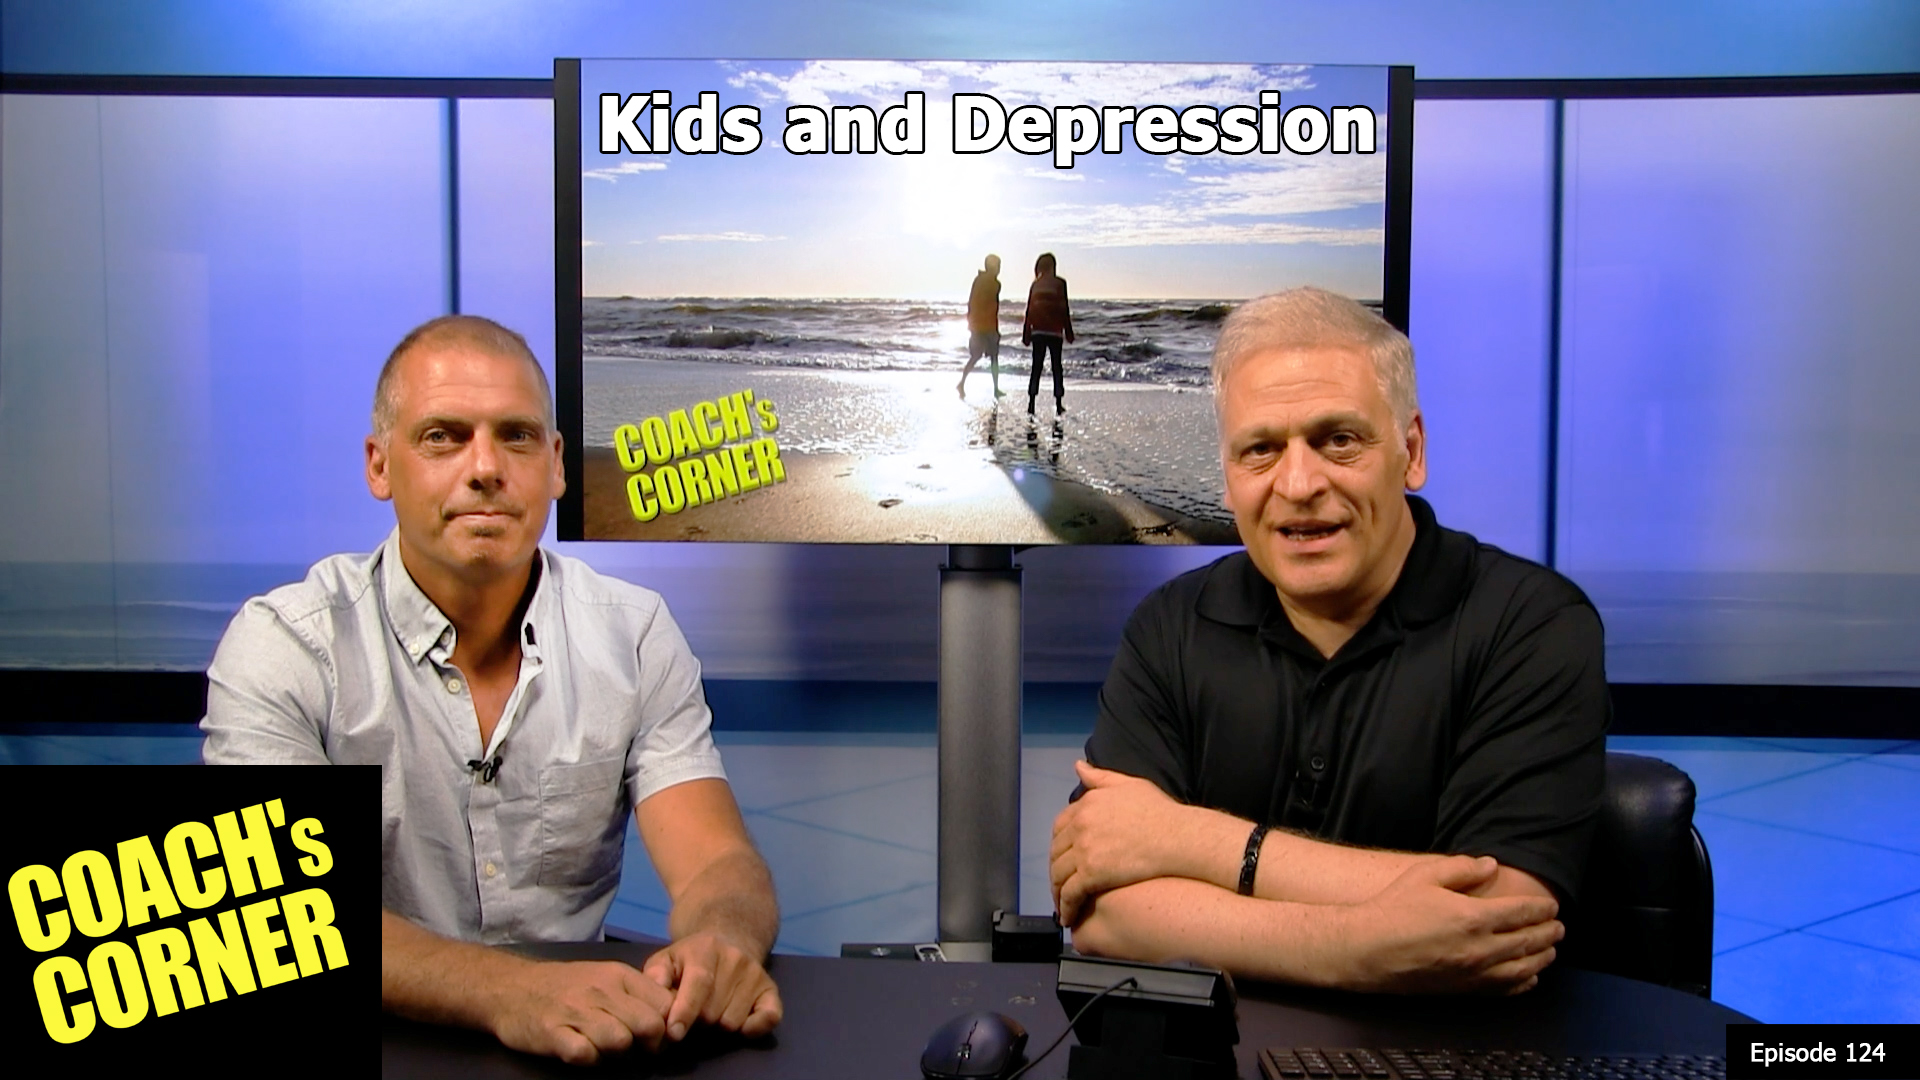 Kids and Depression: Know the Signs